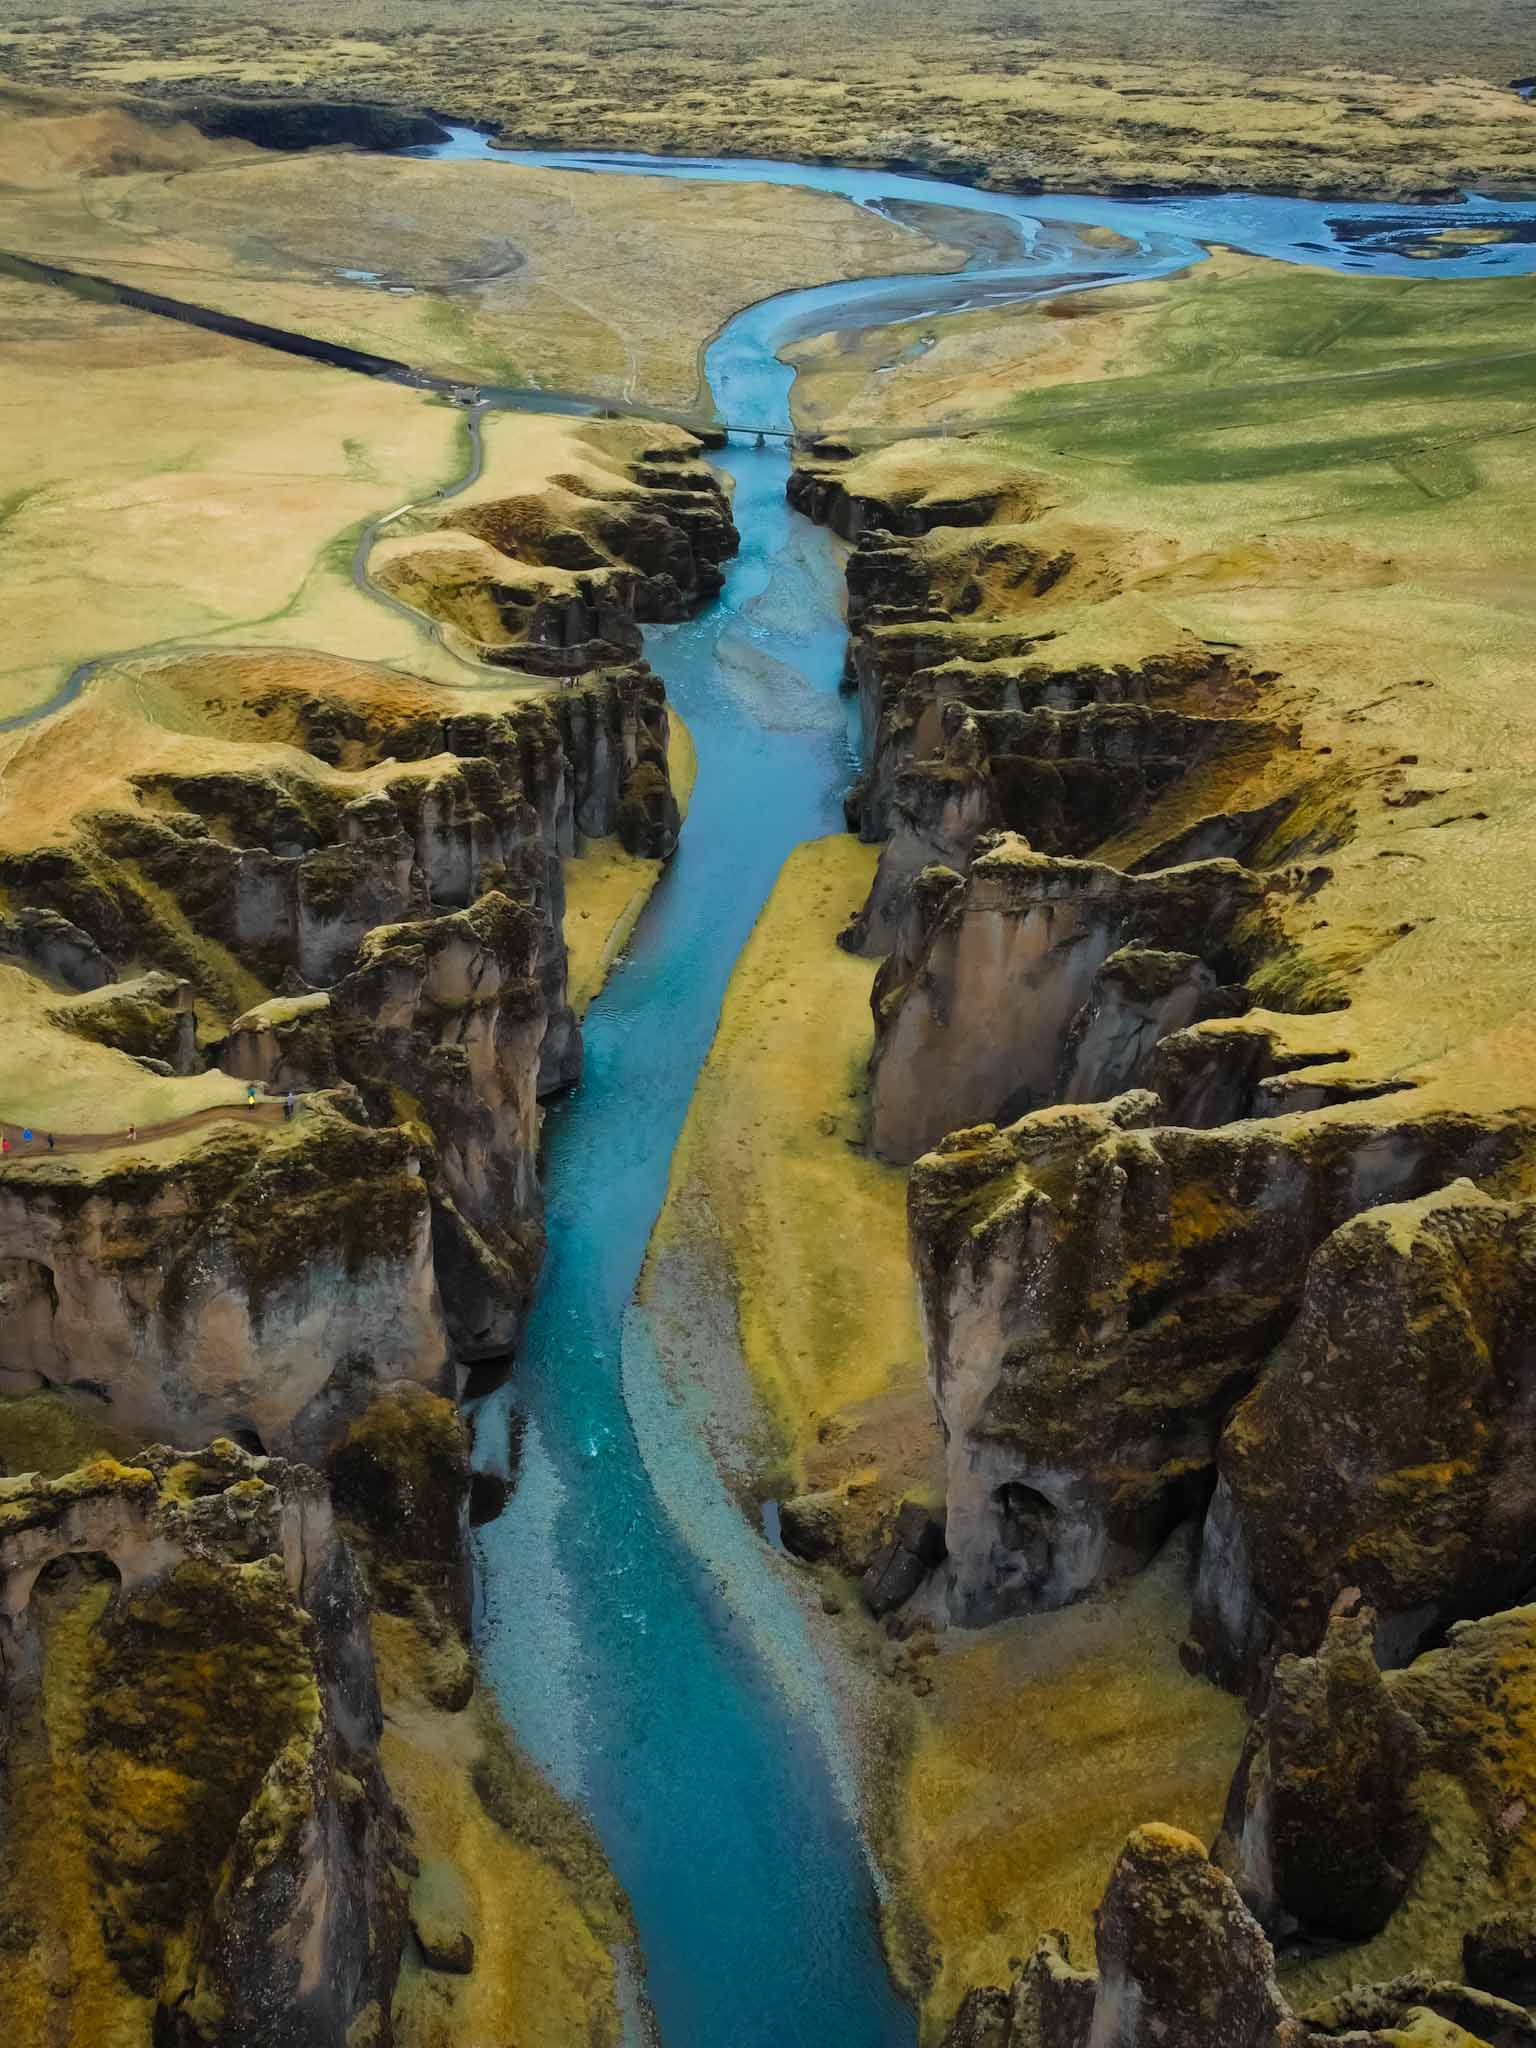 Fjadrargljufur - the famous river canyon in Iceland